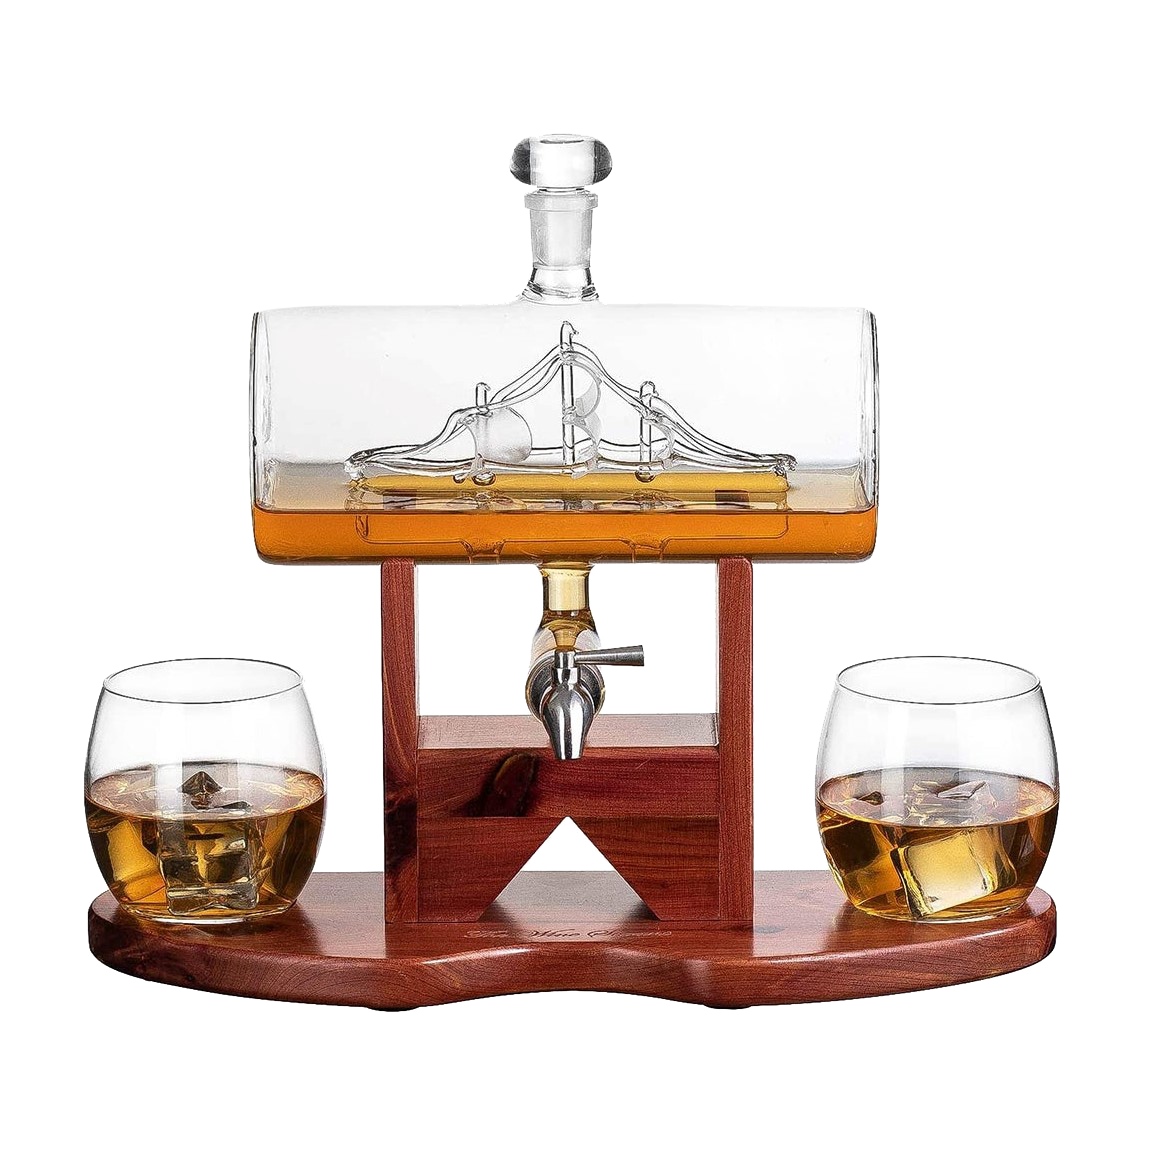 Whiskey Decanter Set, Liquor Dispenser for Home Bar, Crystal Glass - 1250ml Ship & 2 Whiskey Glasses Beautiful Stand Fathers Day, Gift for Dad, Husband or Boyfriend - Liquor Lux 100% Lead-Free